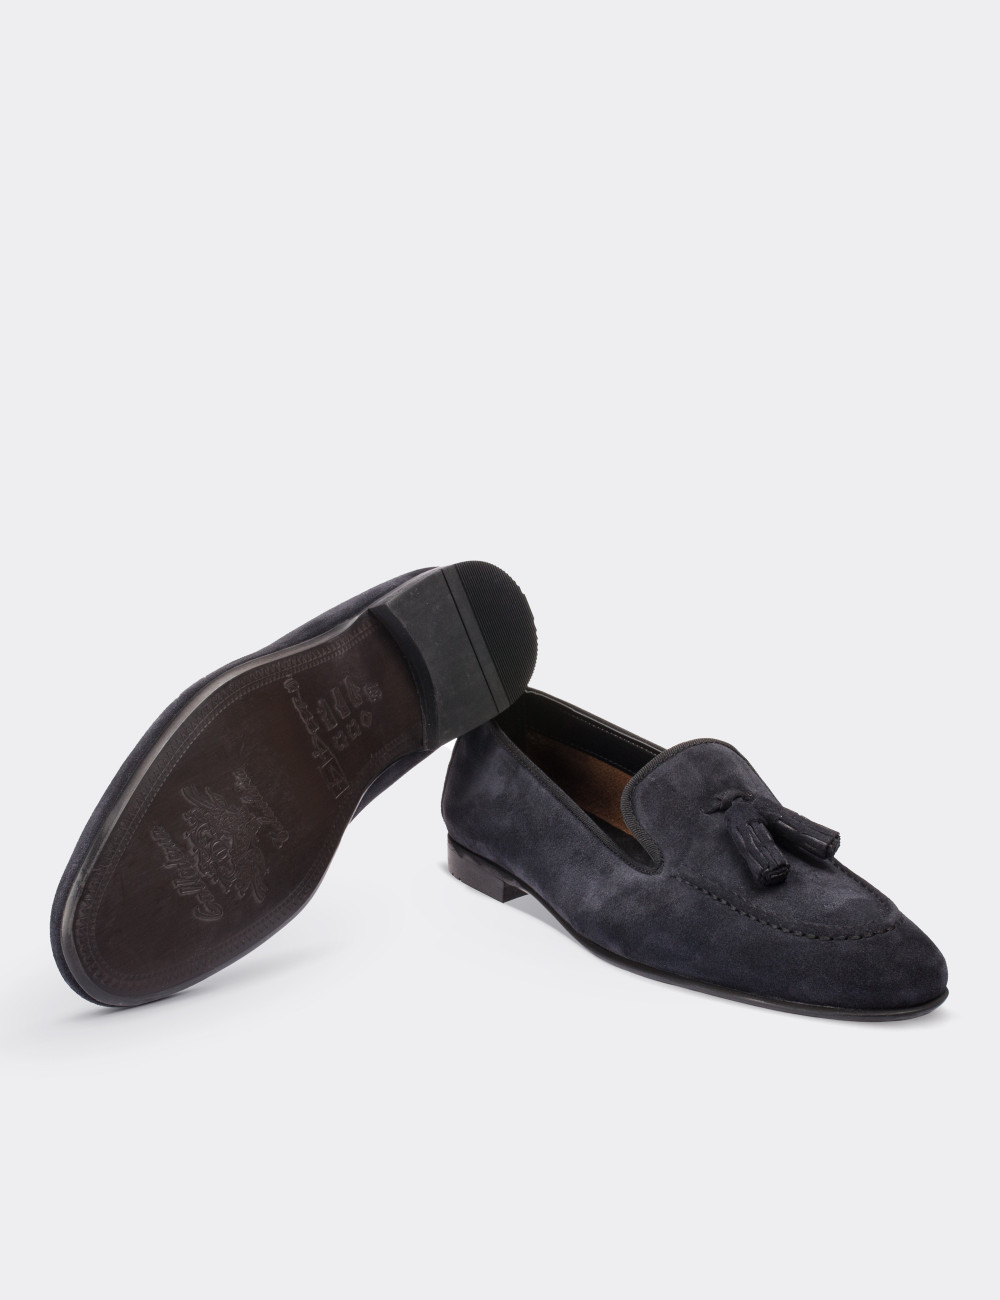 Navy Suede Leather Loafers - 01619ZLCVM01